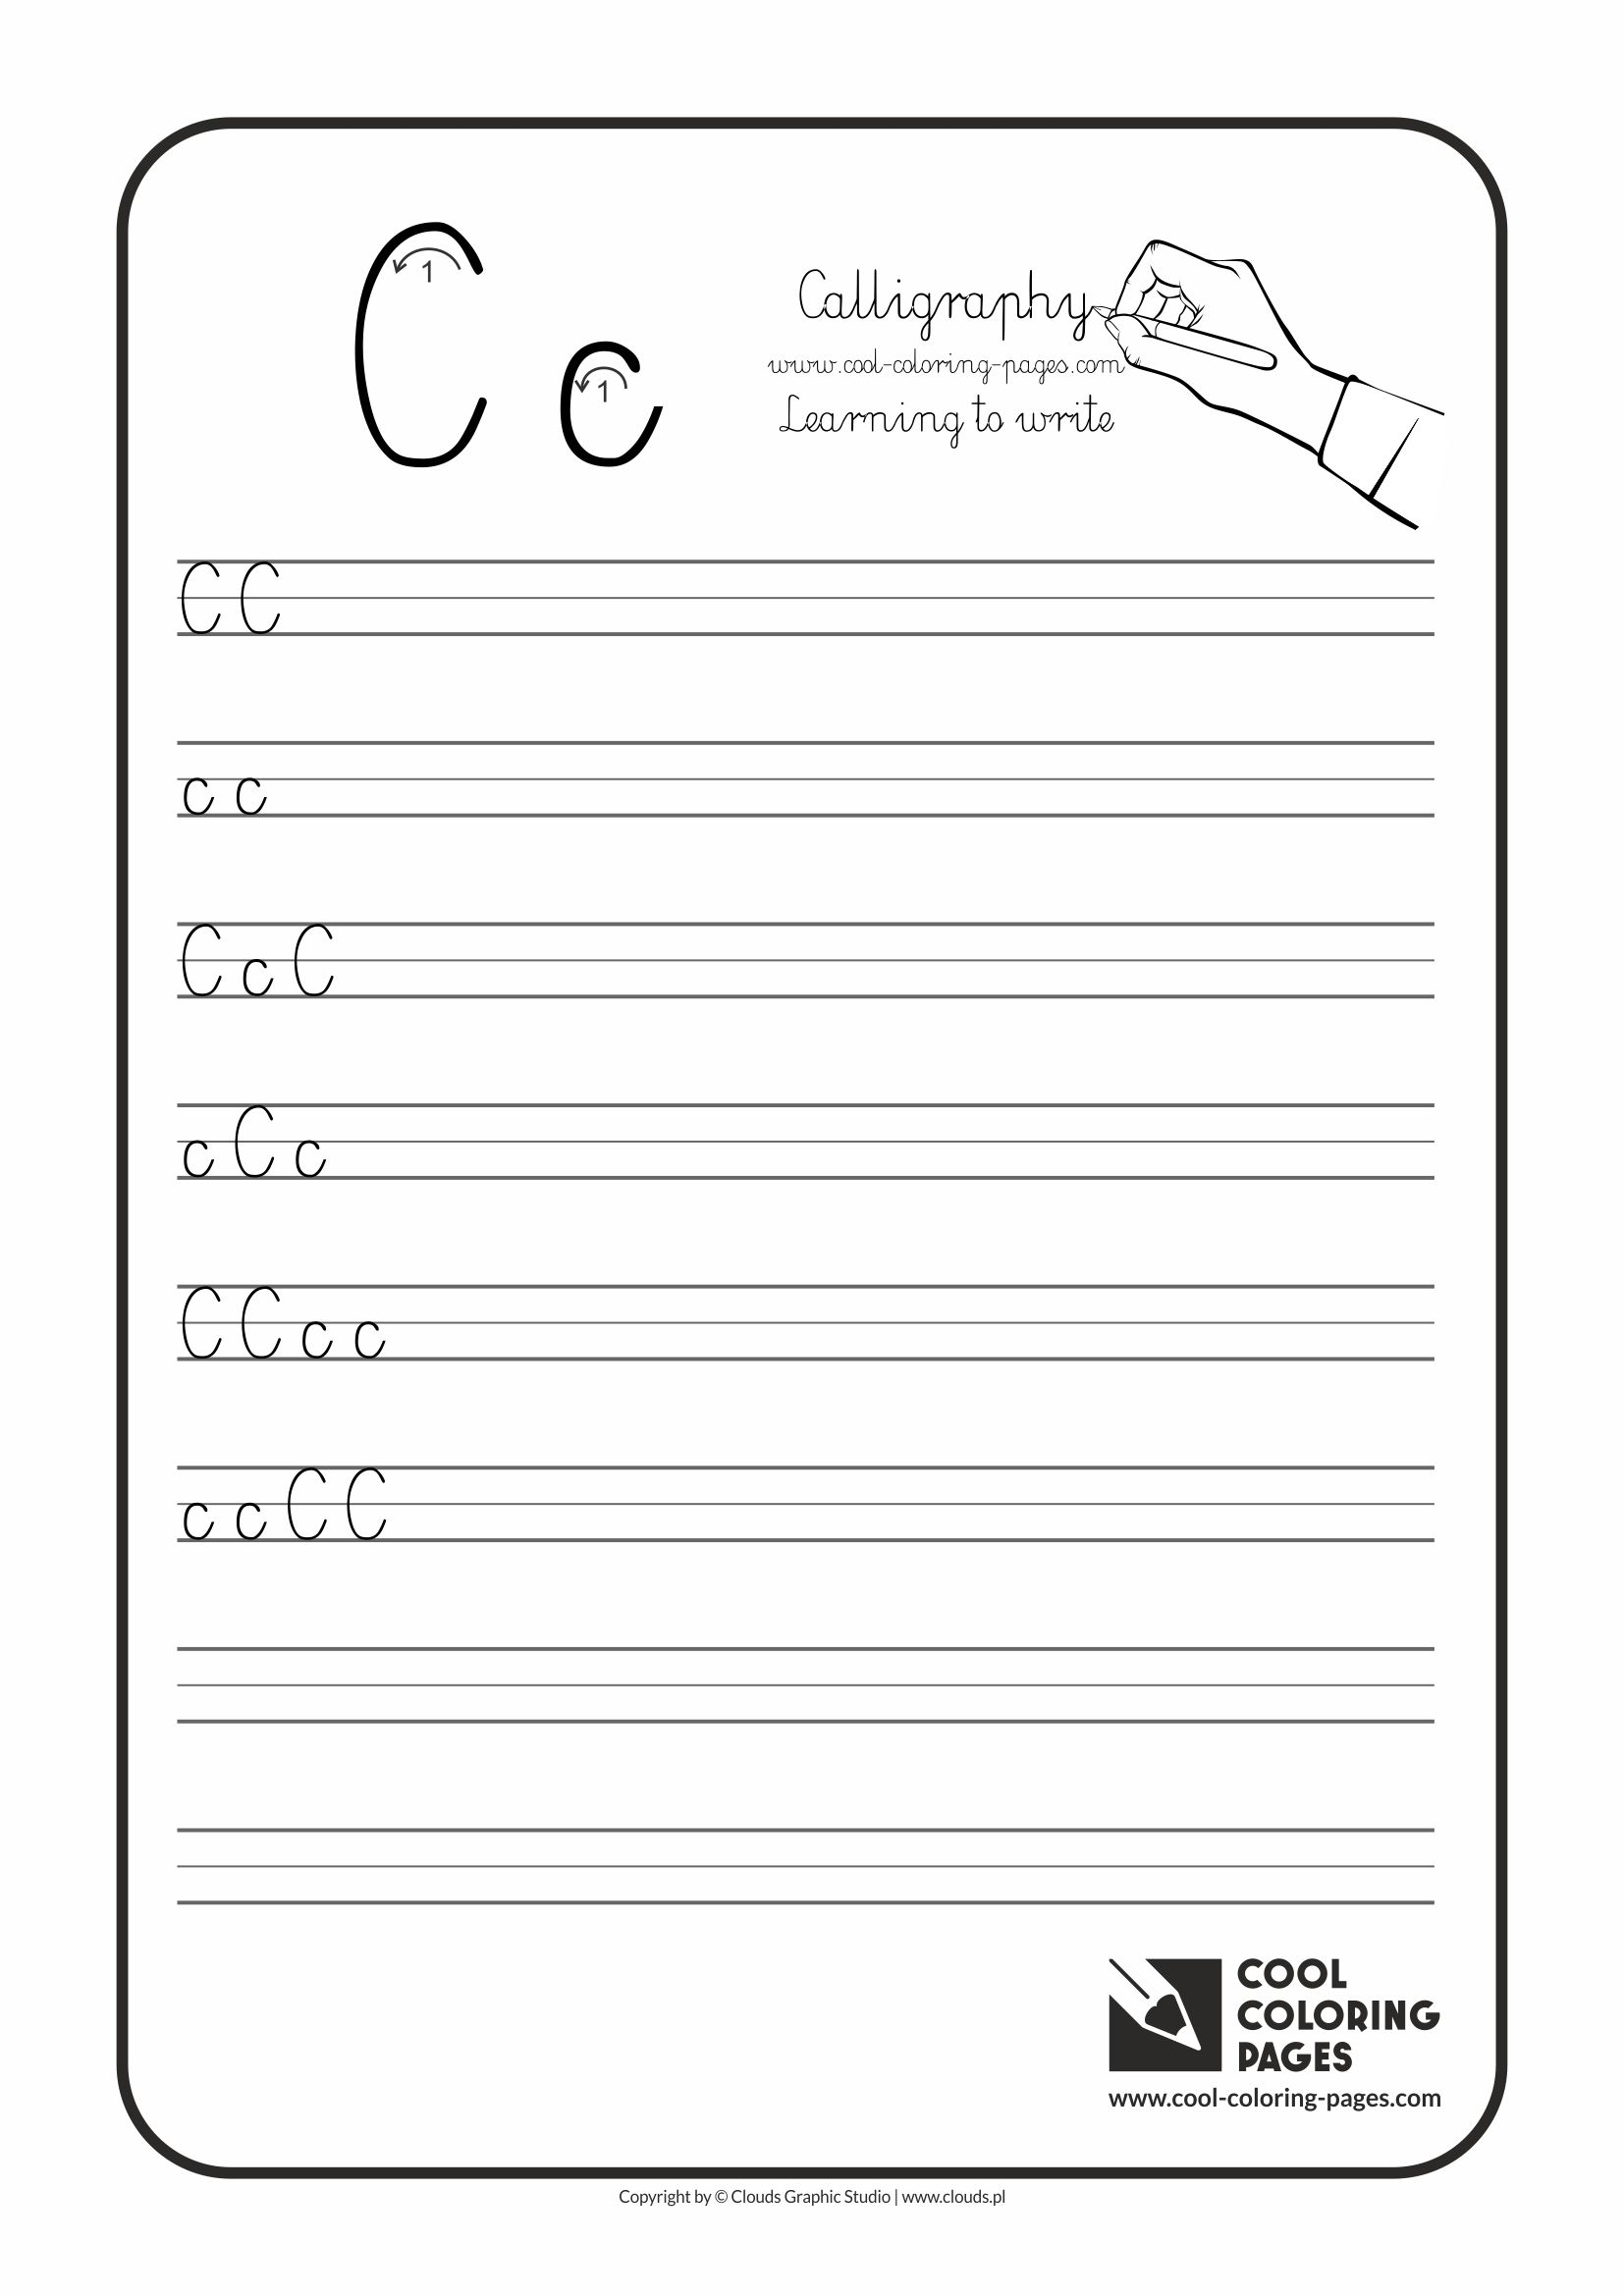 Cool Coloring Pages Calligraphy For Kids - Letters for Calligraphy Letters Tracing